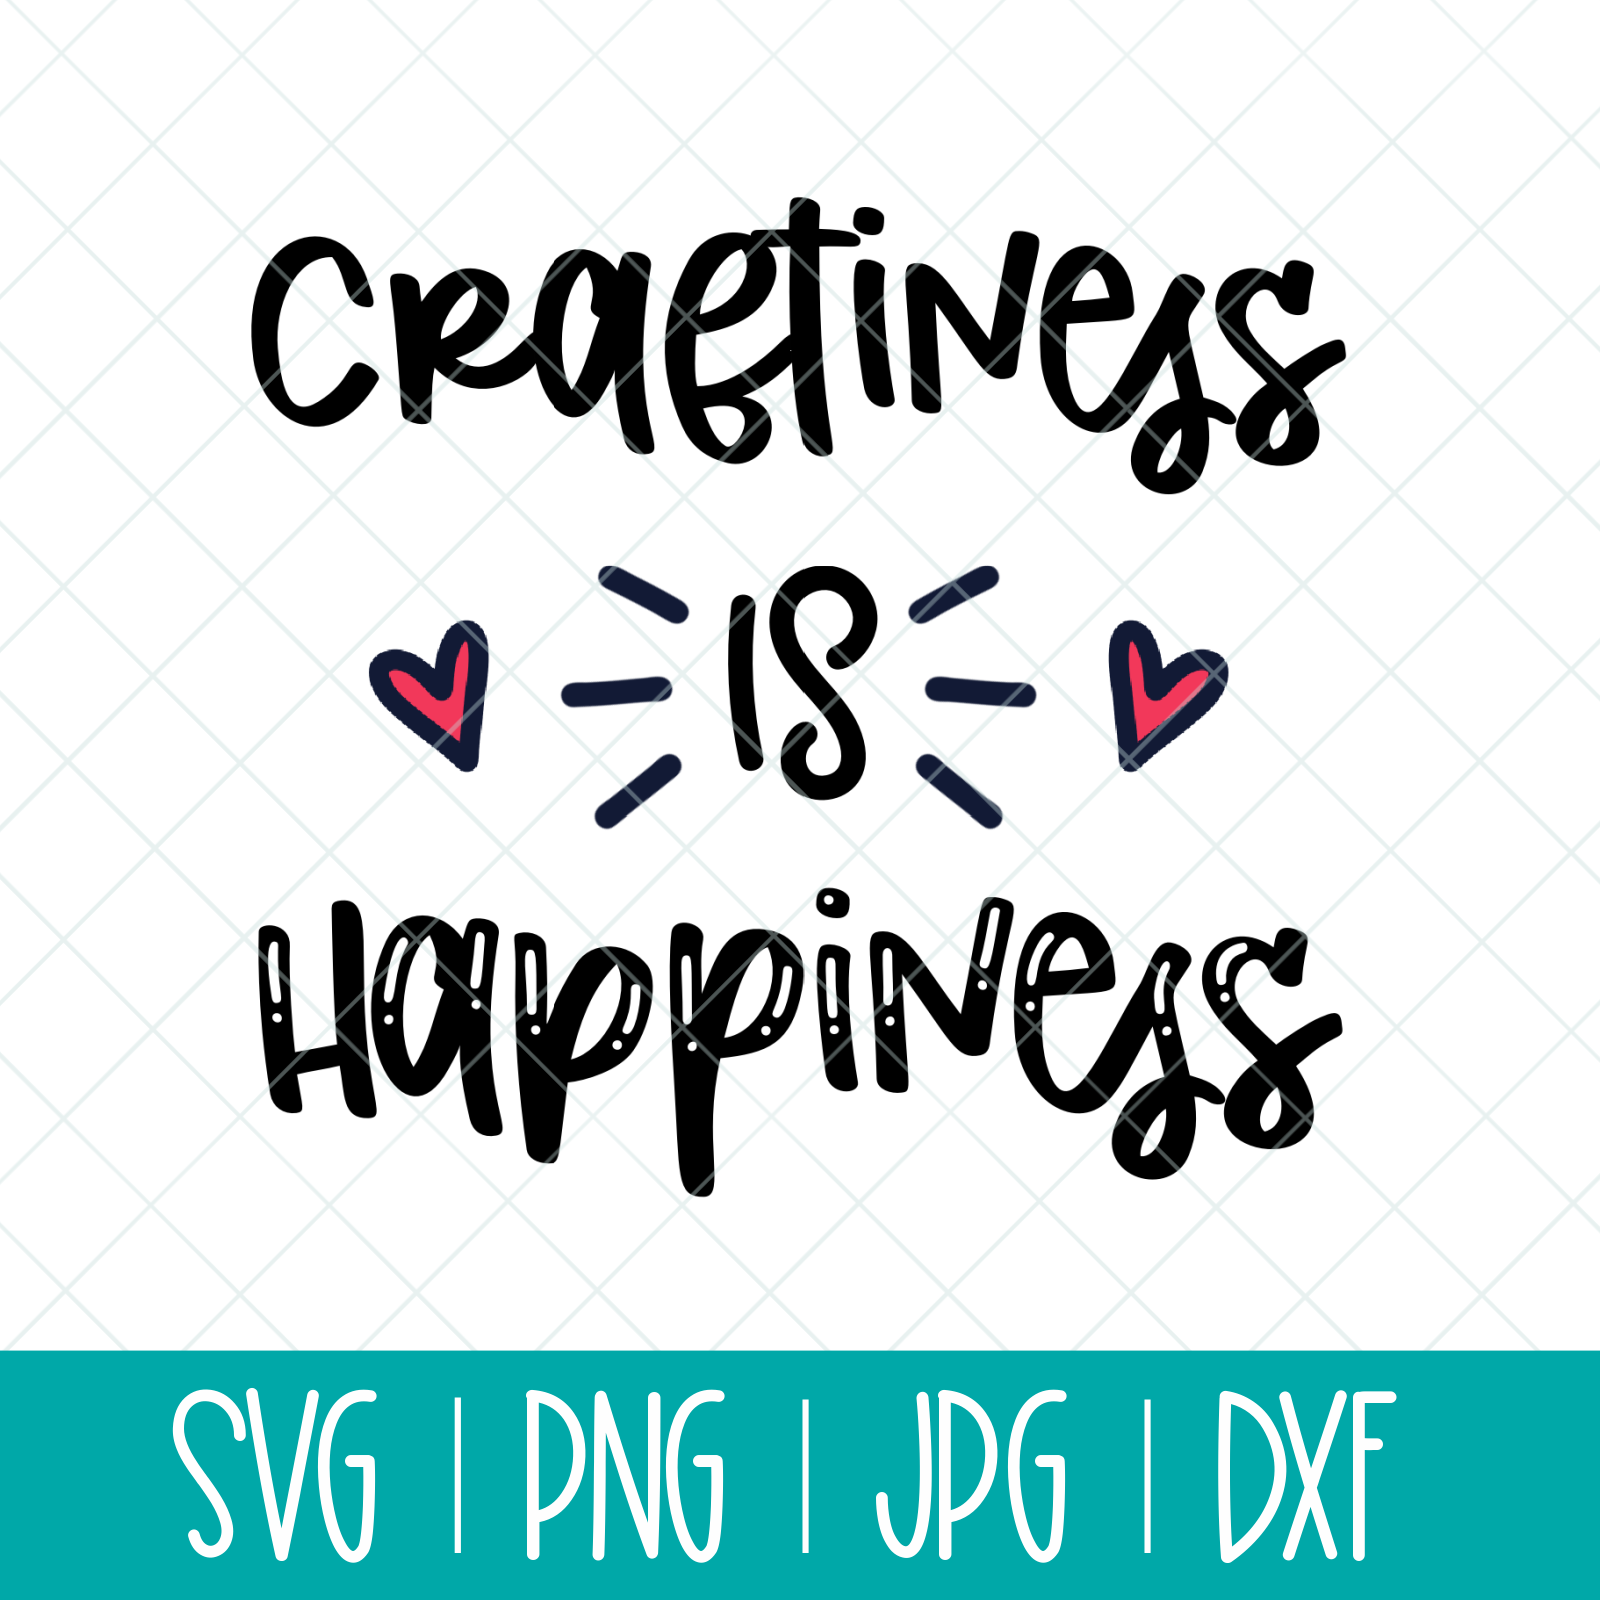 Download Craftiness is Happiness SVG Cut File